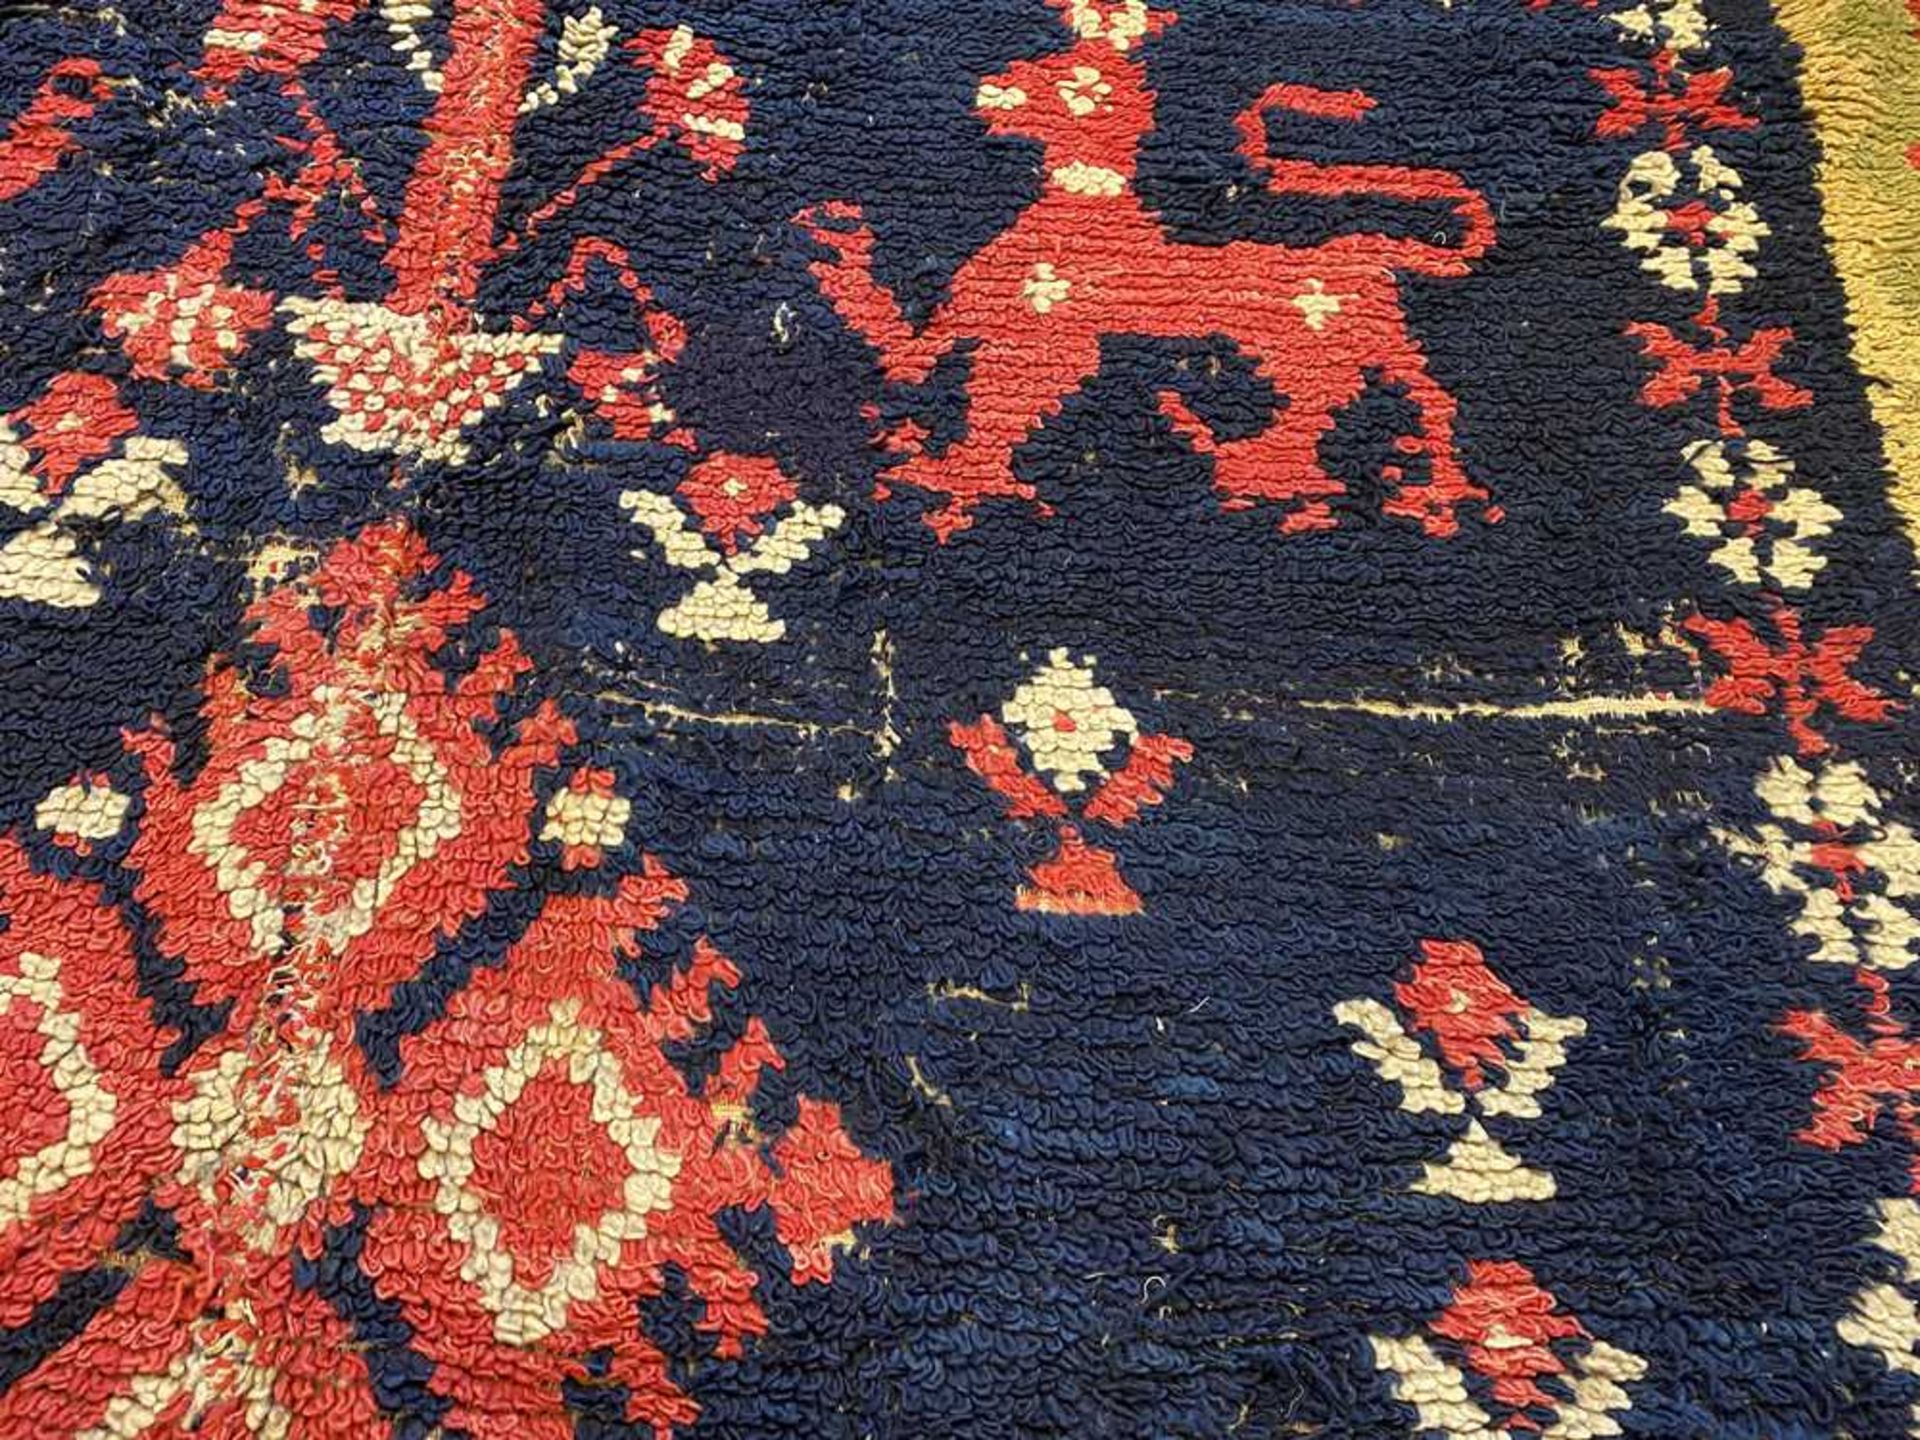 ALPUJARRA CARPET SOUTH SPAIN, LATE 18TH/EARLY 19TH CENTURY - Image 10 of 11